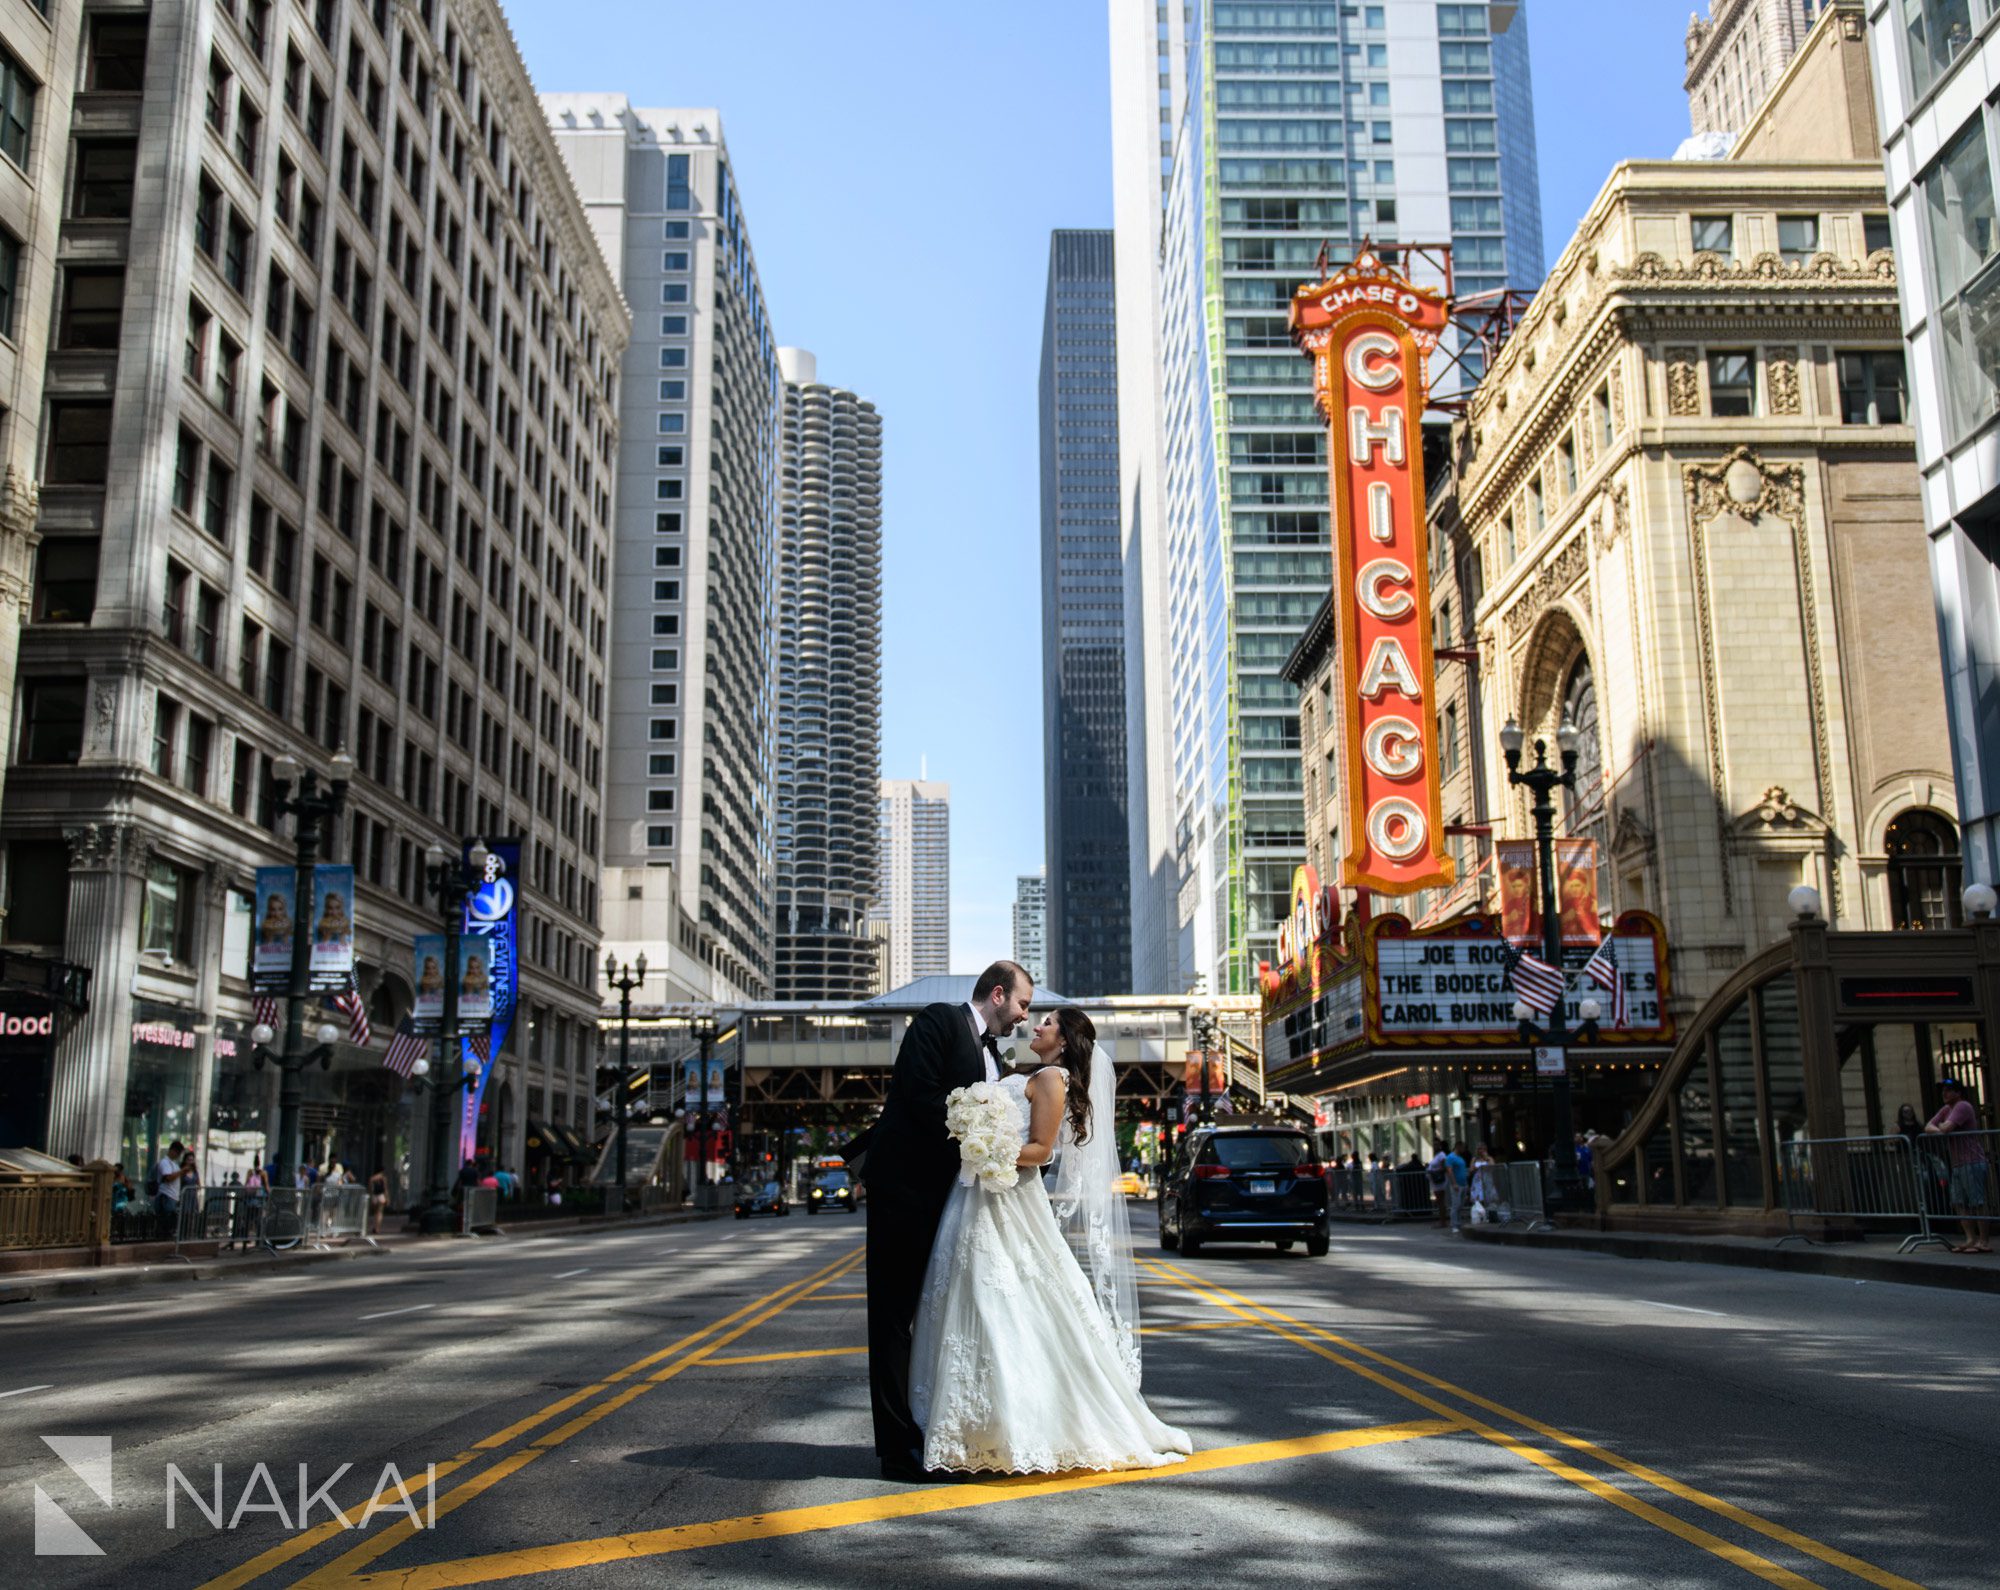 chicago wedding photo locations state street chicago theatre sign marquee